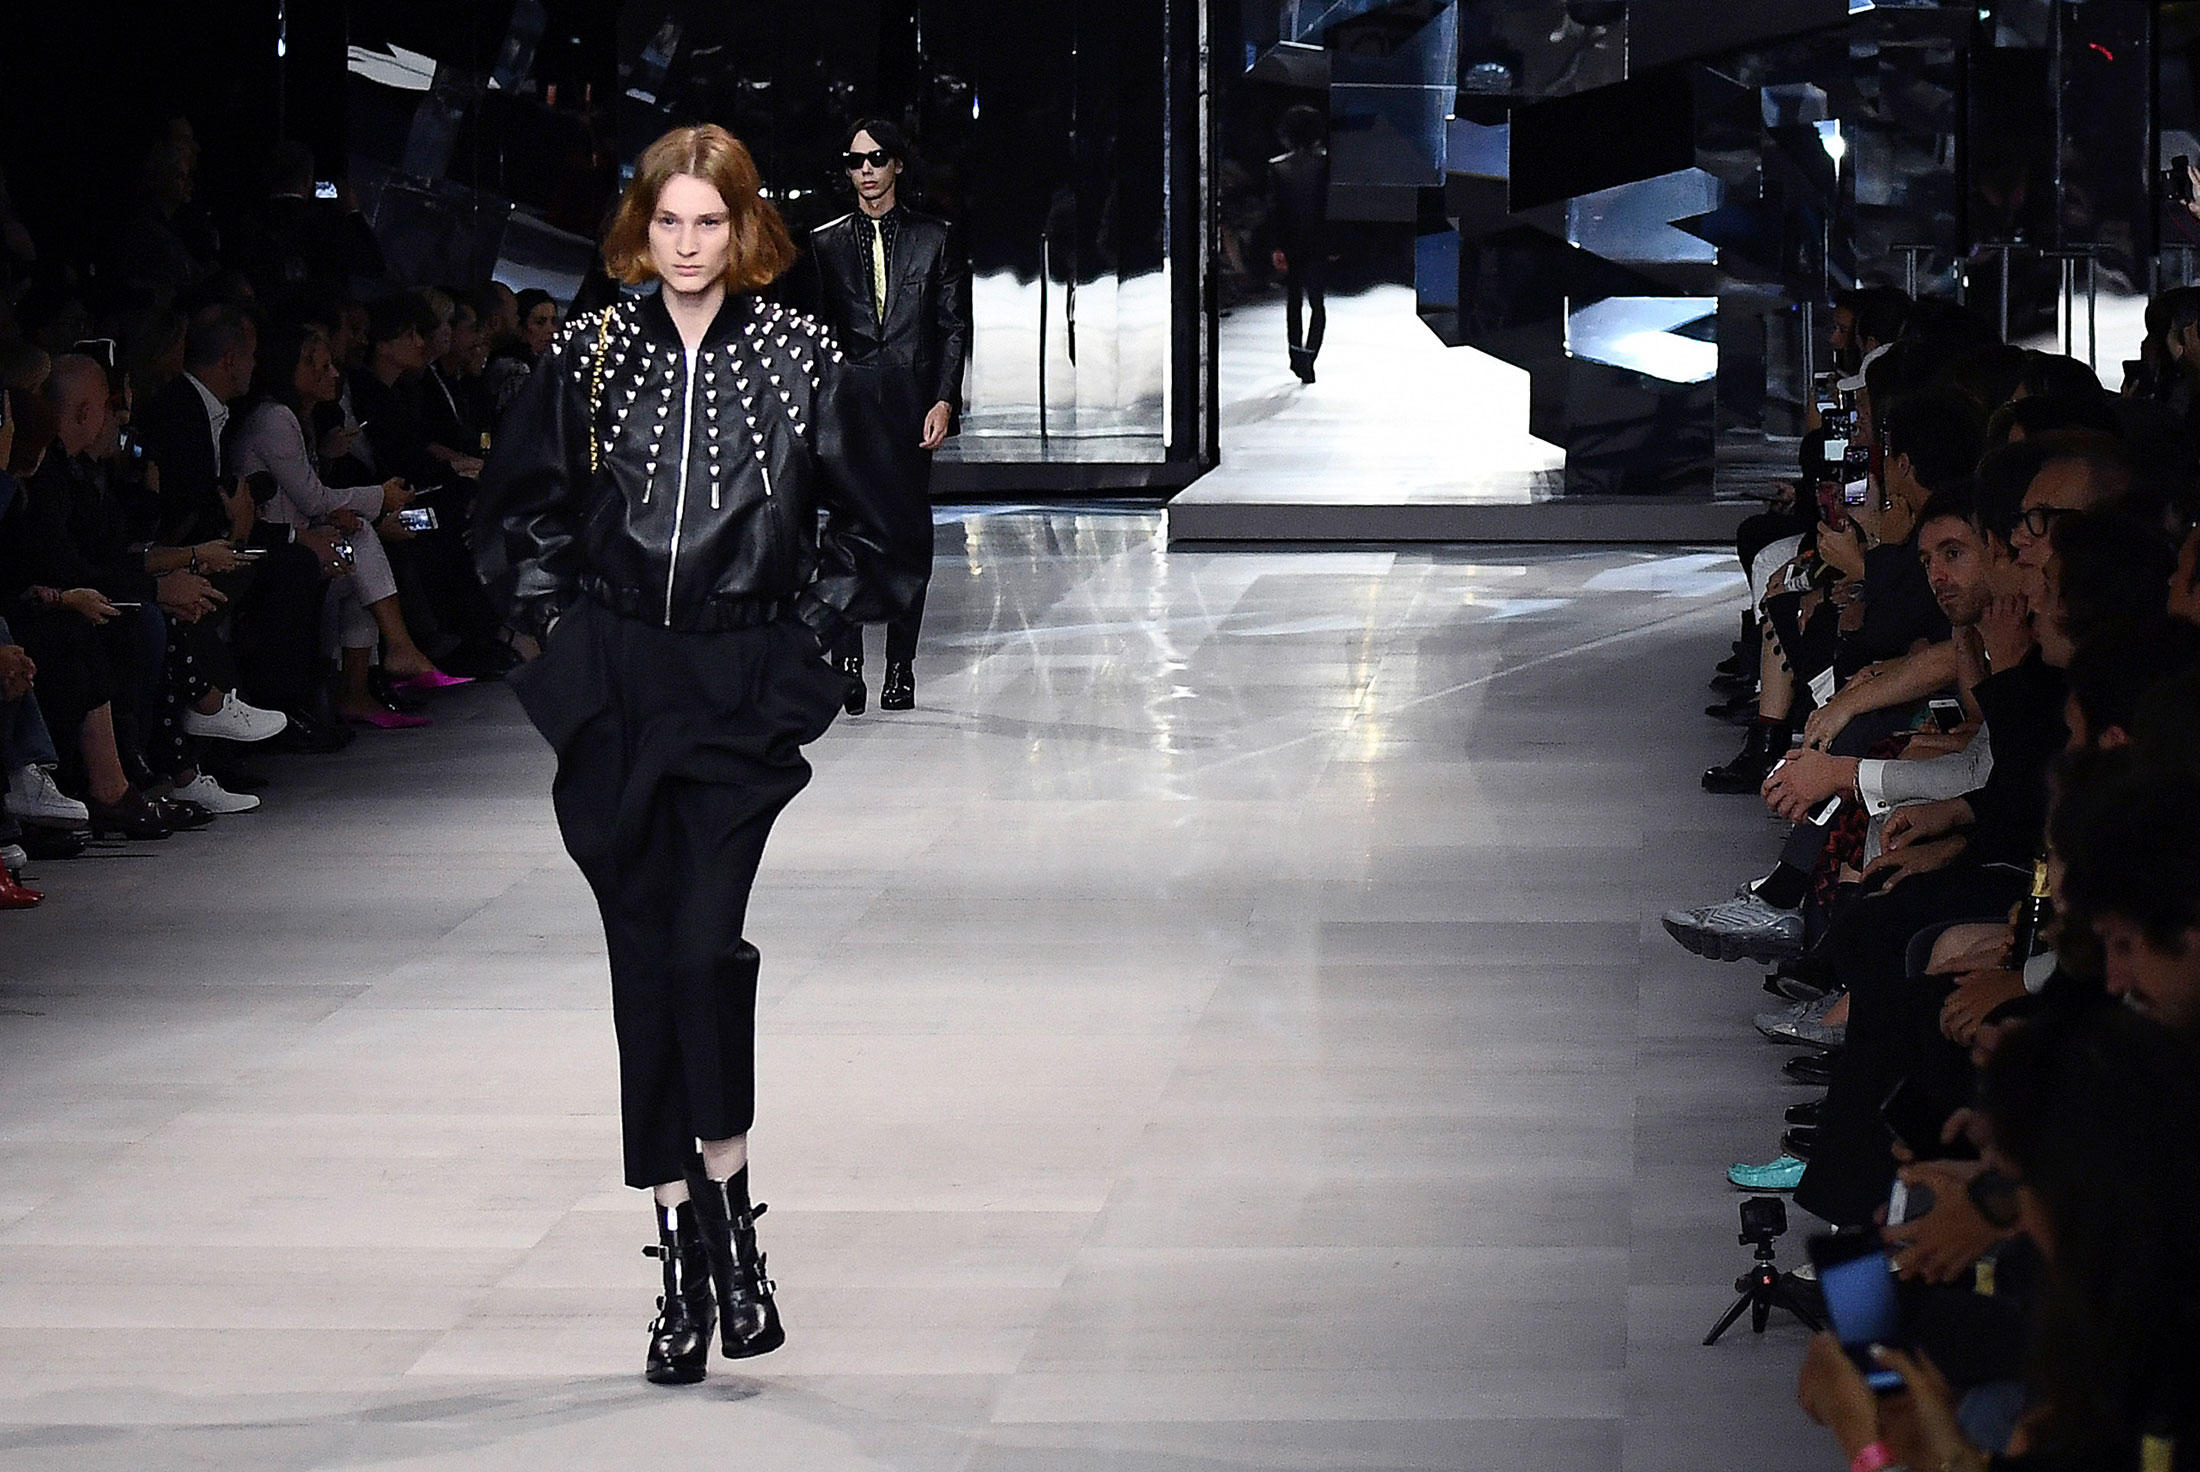 A Runway Show at LVMH's Celine Just Shifted Luxury's Landscape Bloomberg